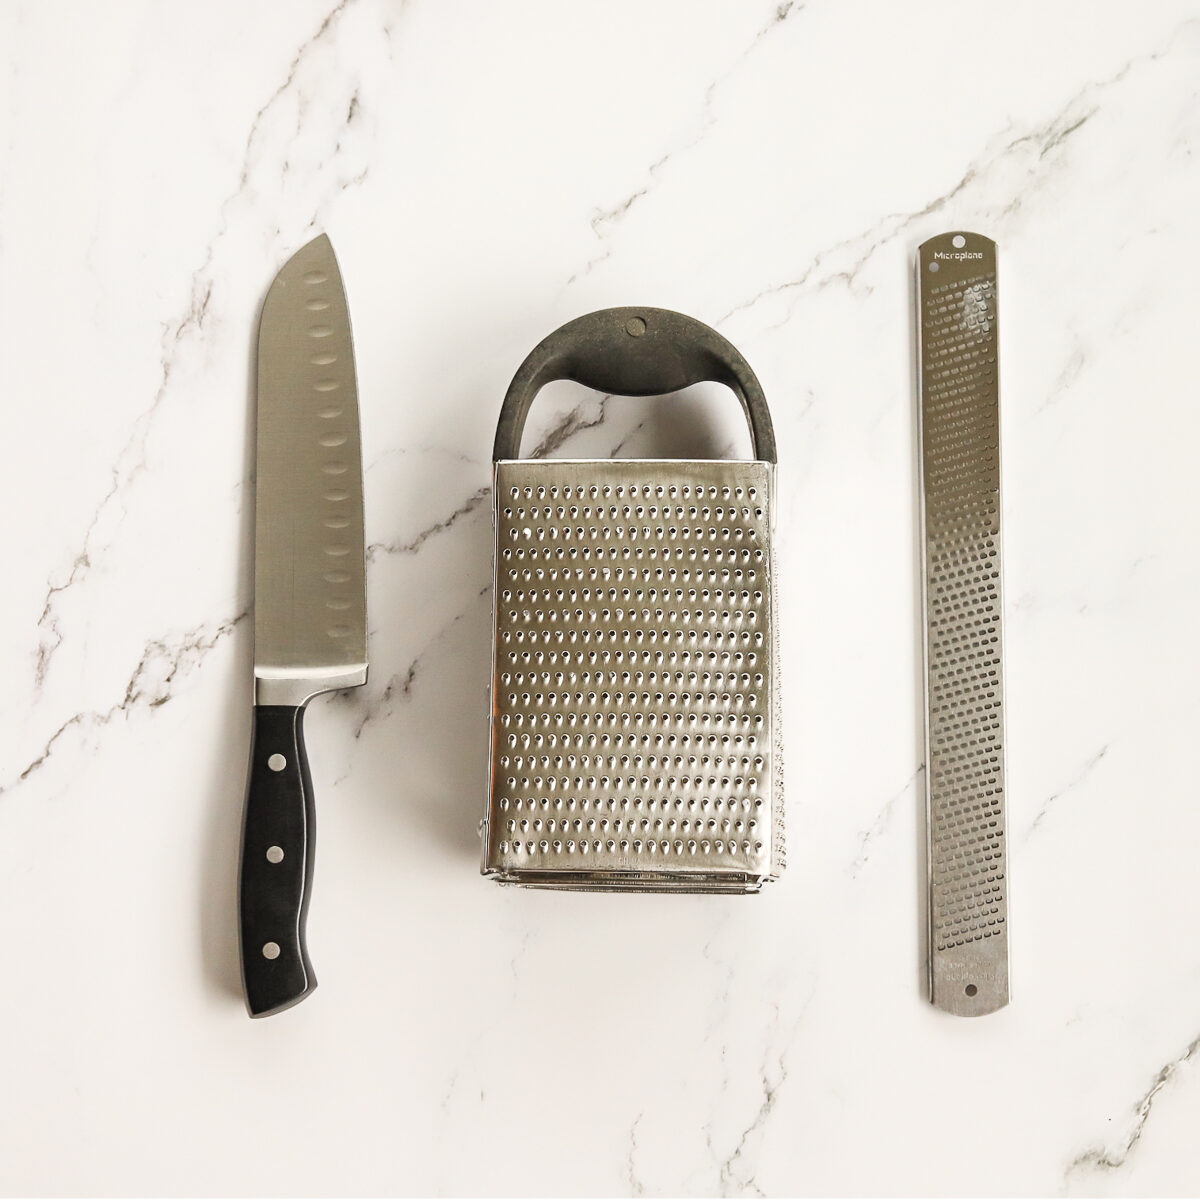 Sharp large chefs knife, box grater and micro plane grater on a white marble countertop.